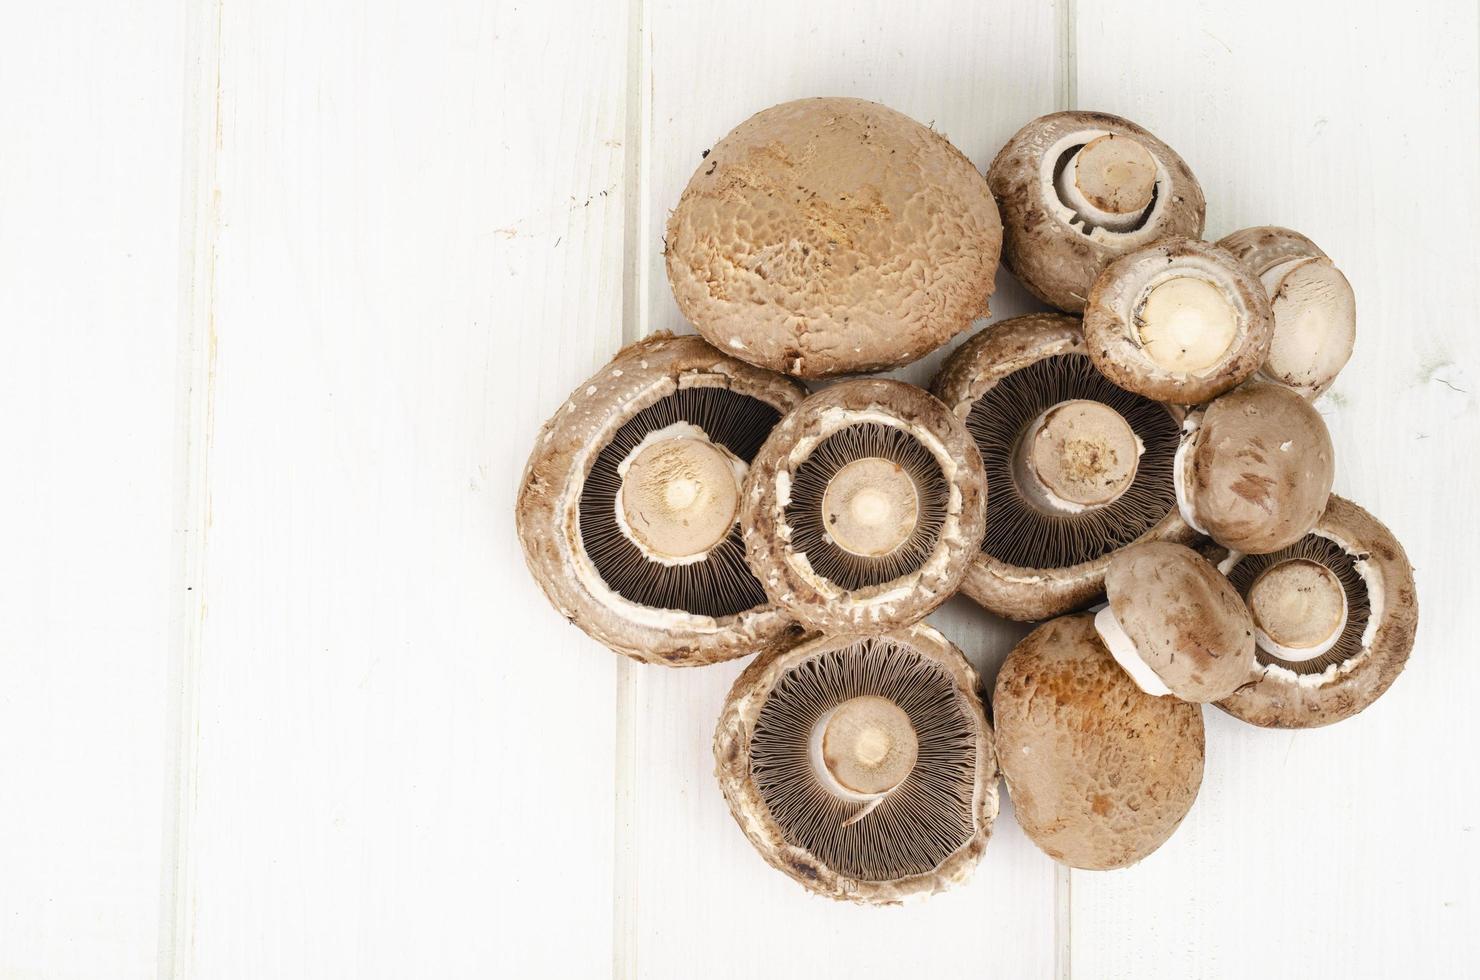 Fresh brown cultivated mushrooms champignons on wooden background. Studio Photo